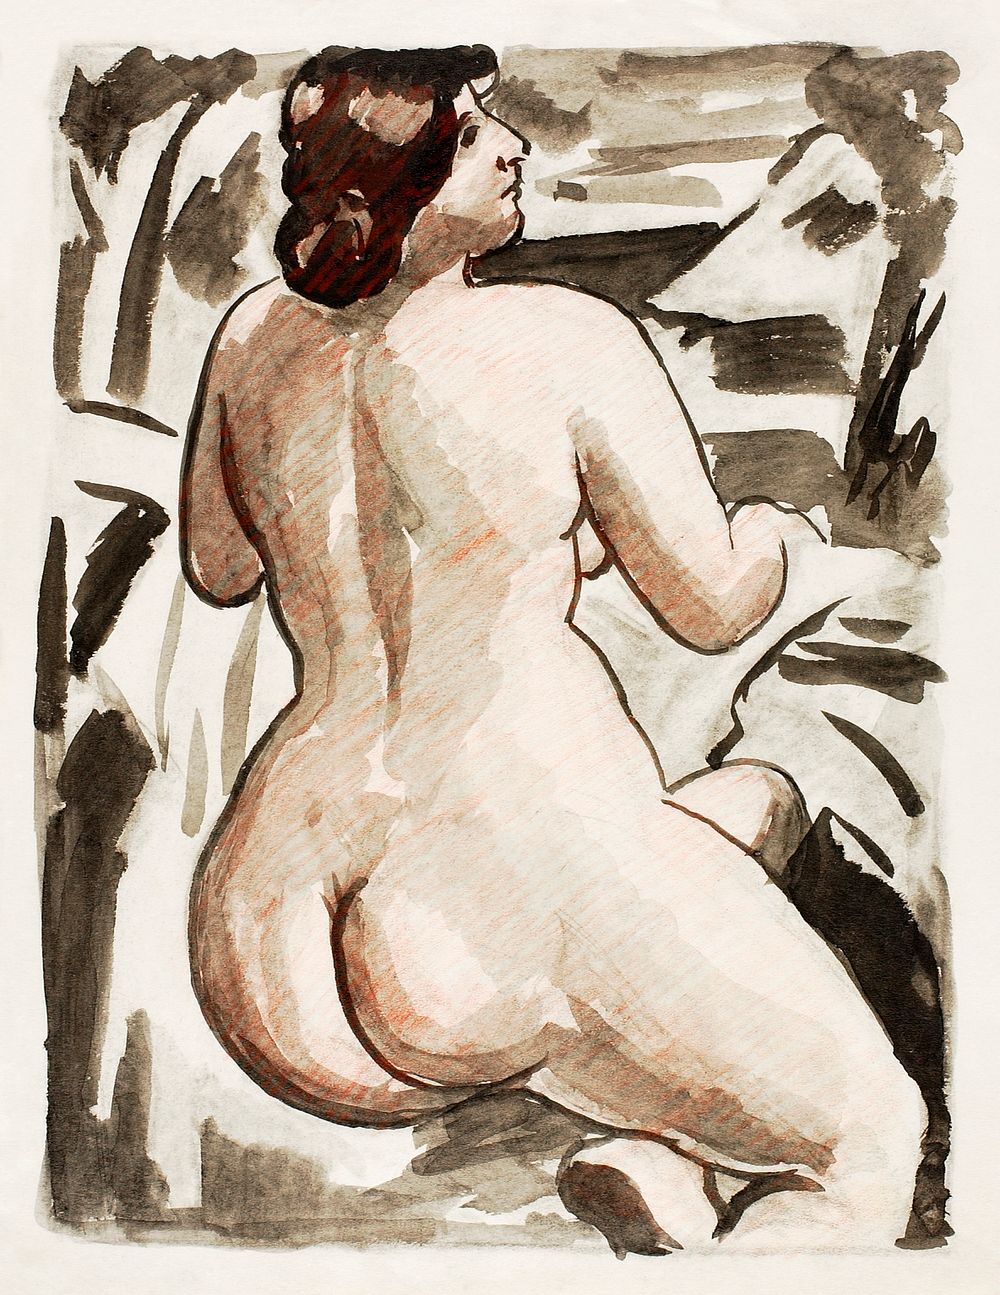 Woman showing her nude bum. Standing Female Nude by Carl Newman. Original from The Smithsonian. Digitally enhanced by…